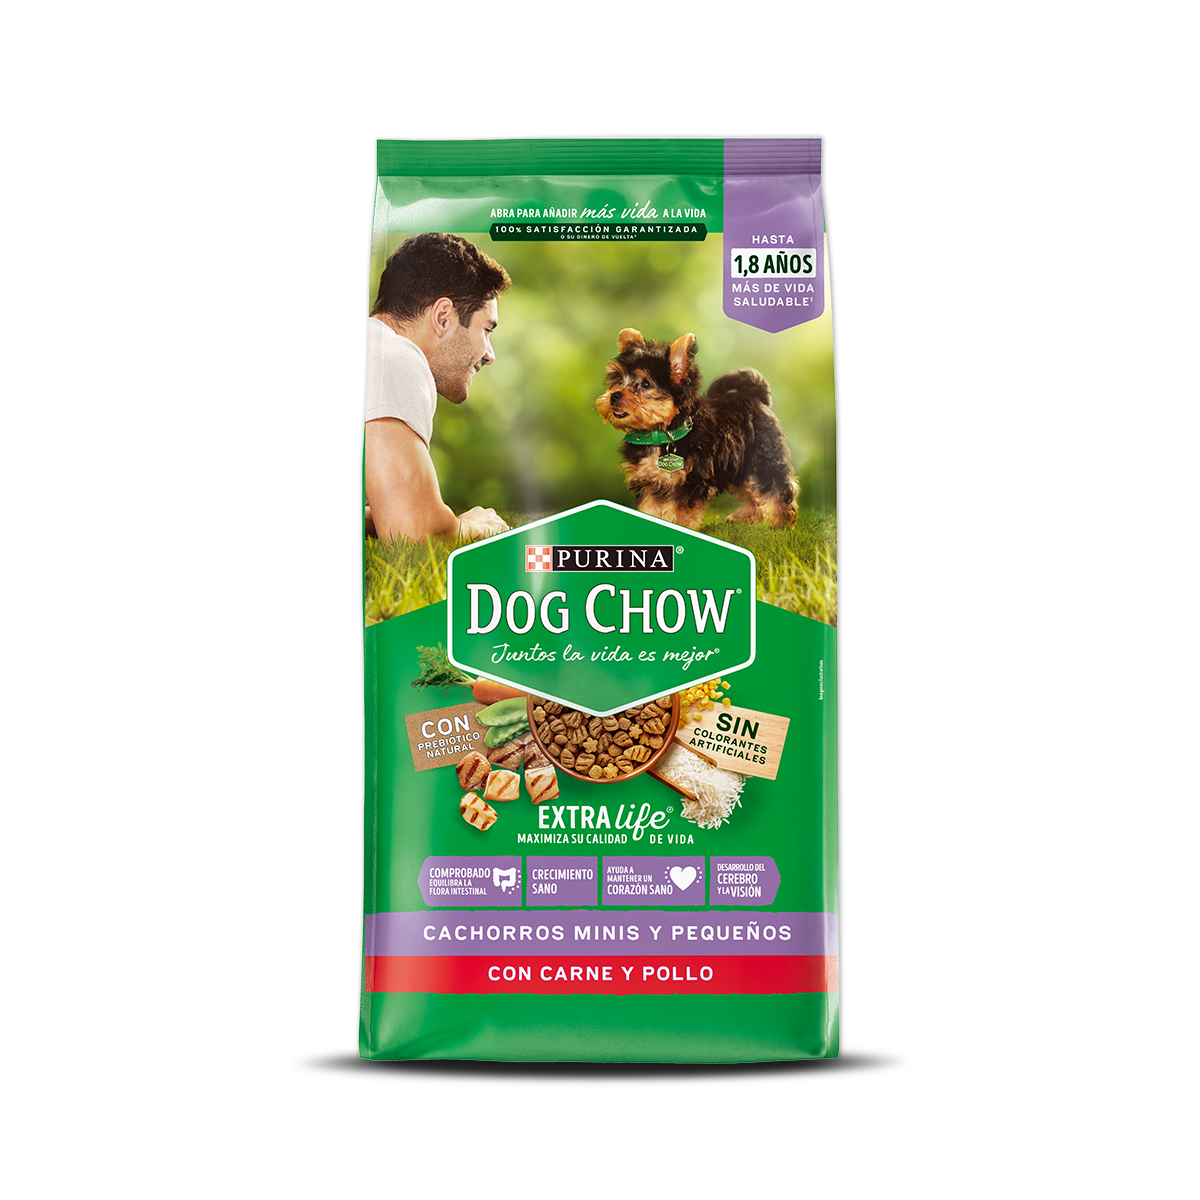 Purina-DogChow-chachorro-minis-colombia.png